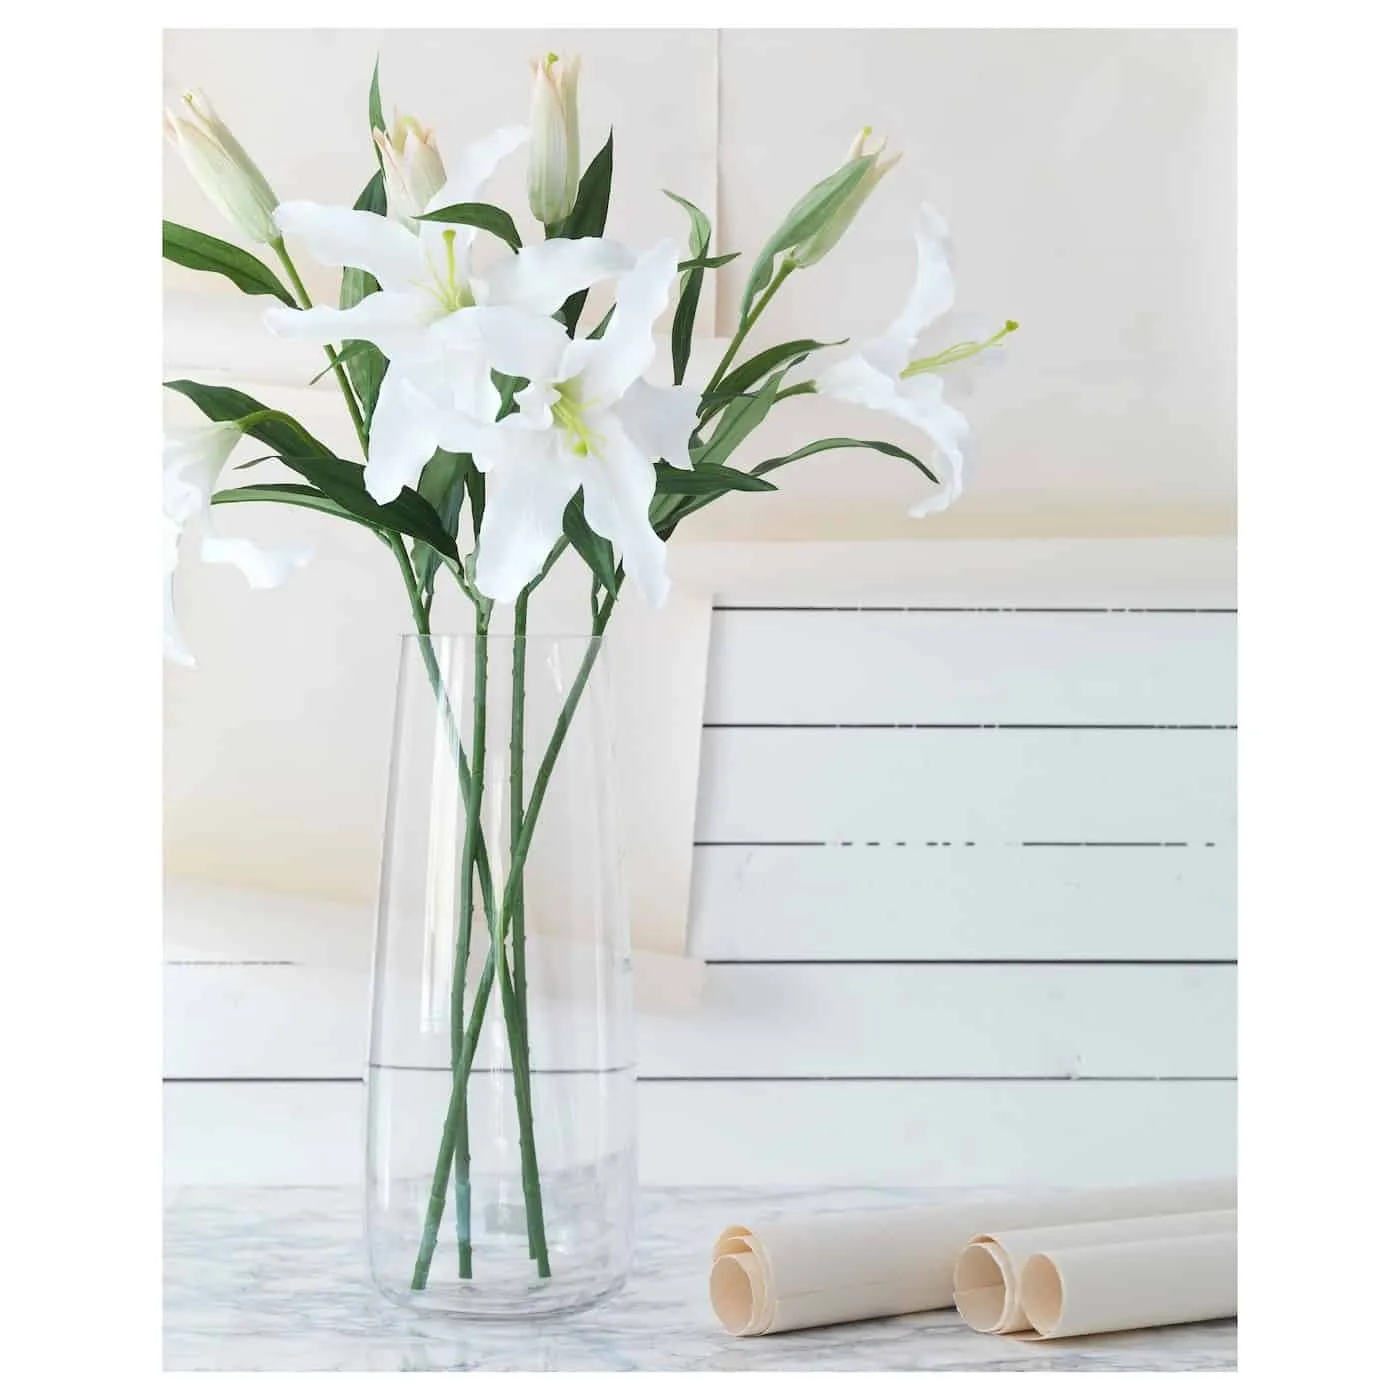 White lily flowers in a glass vase with green foilage